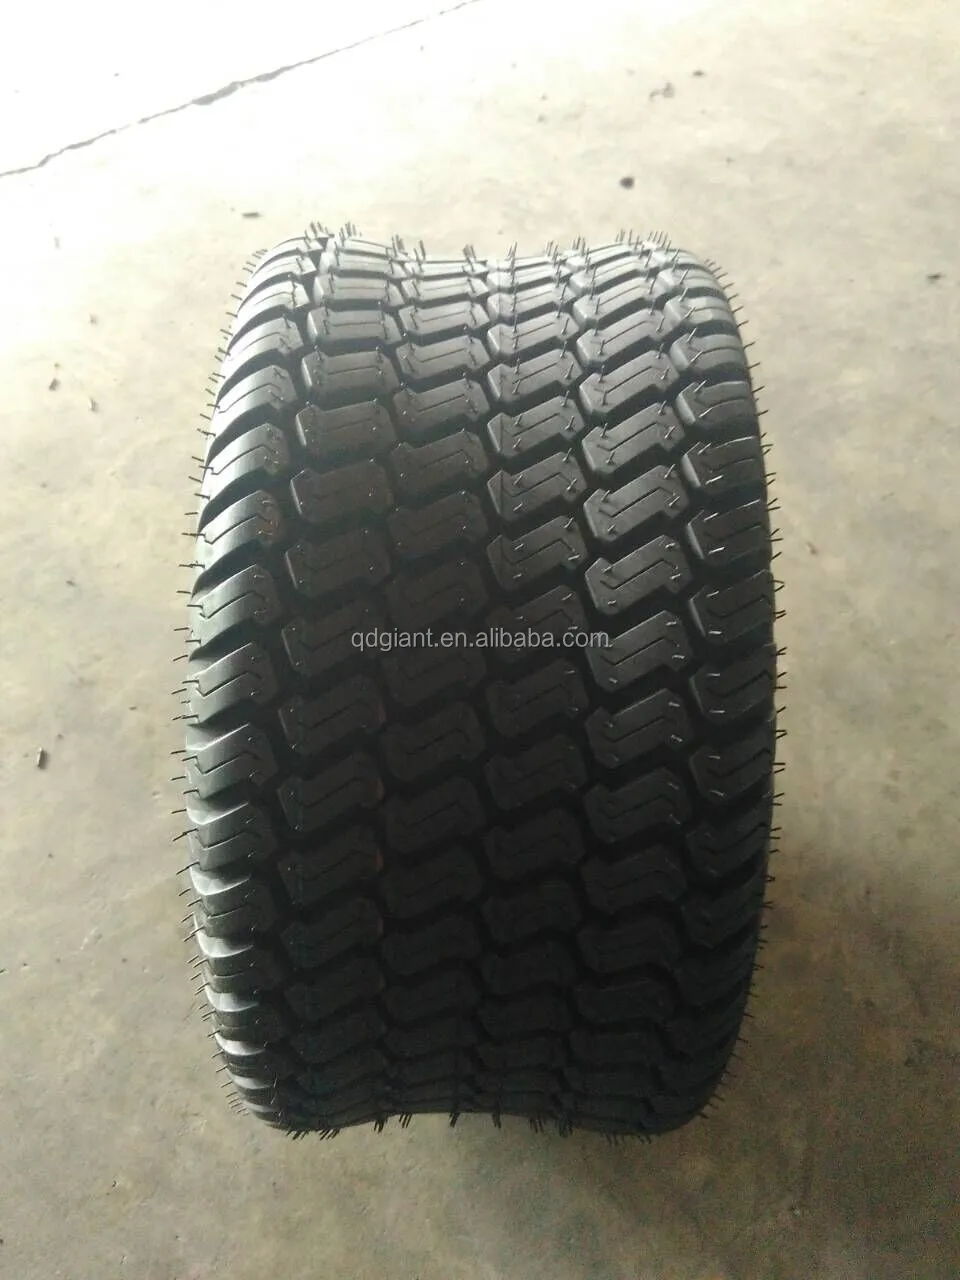 High quality and durable ATV tire 9.50-8 8.50-8